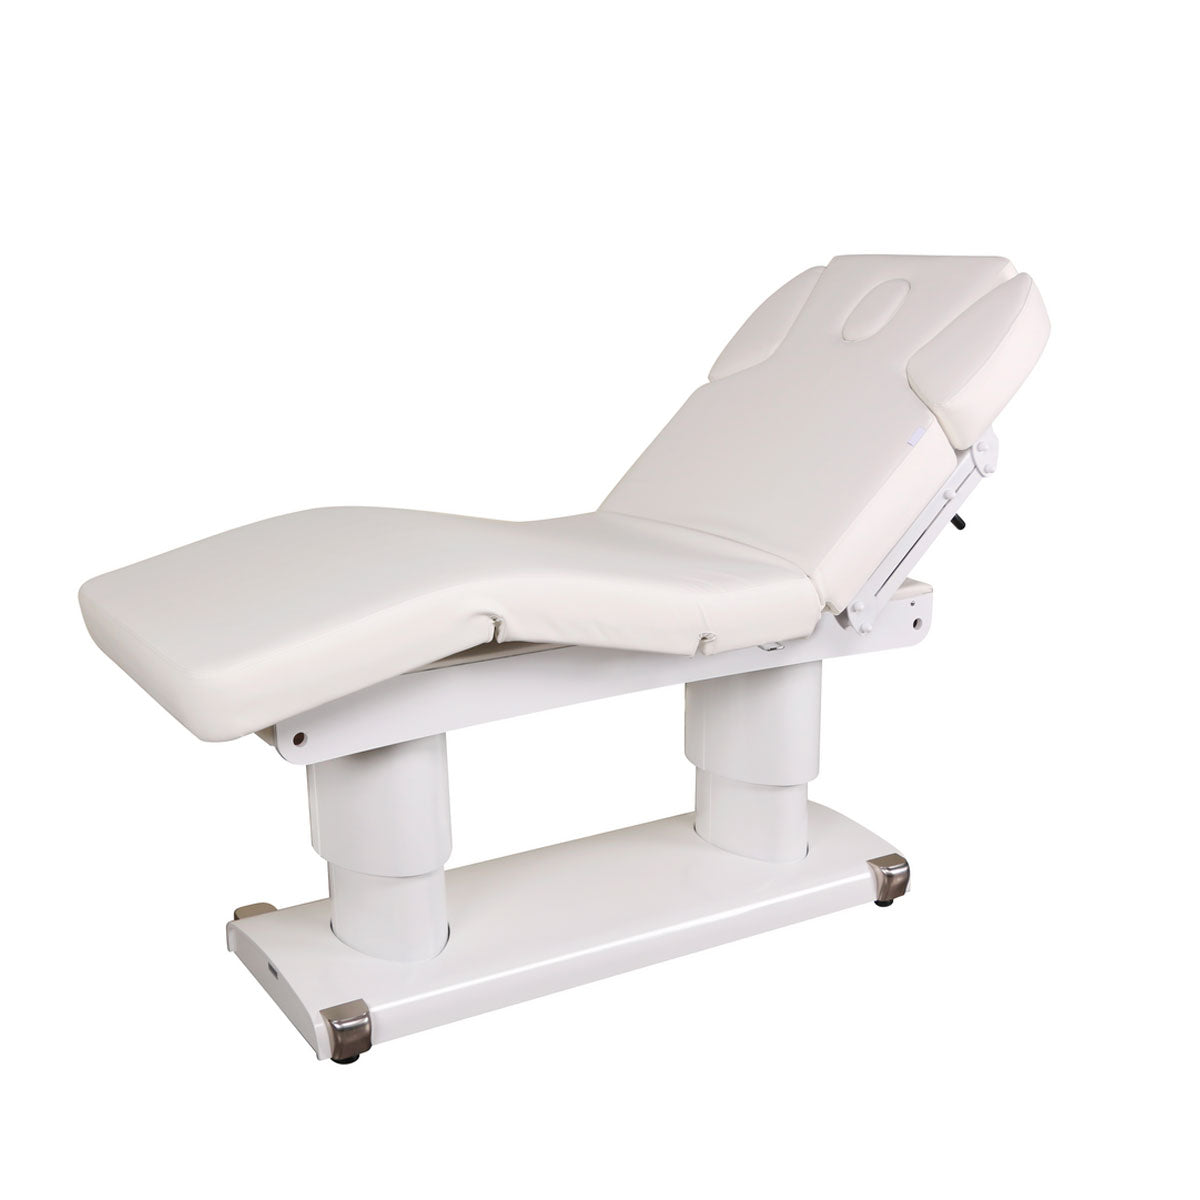 SpaMarc . Cooper (All White) . Massage Bed . Wooden . 3 ElectricMotor